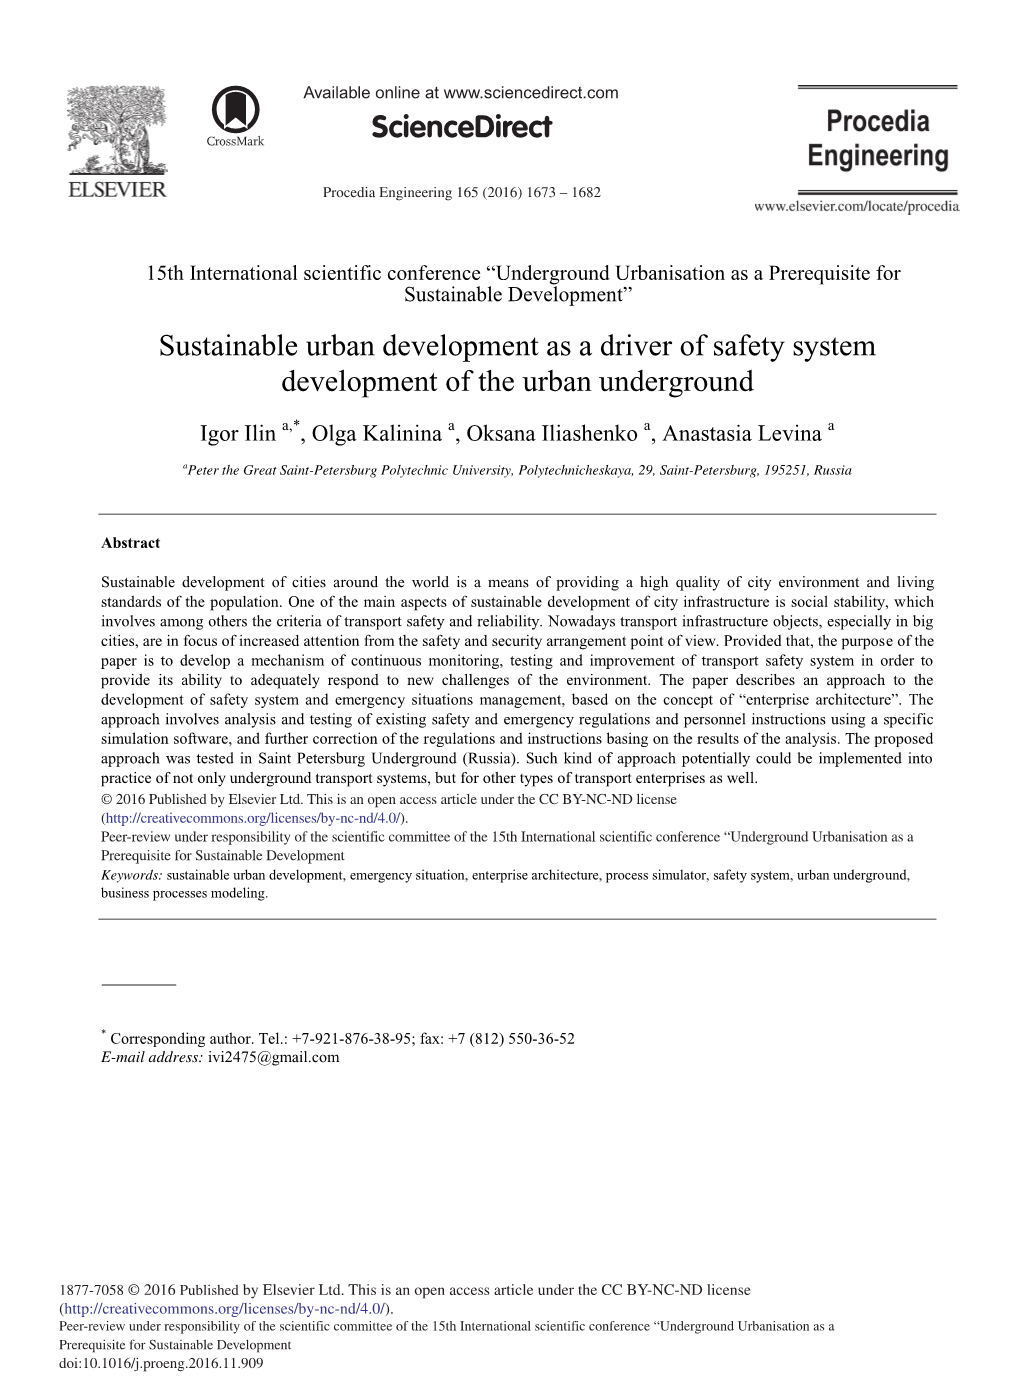 Sustainable Urban Development As a Driver of Safety System Development of the Urban Underground